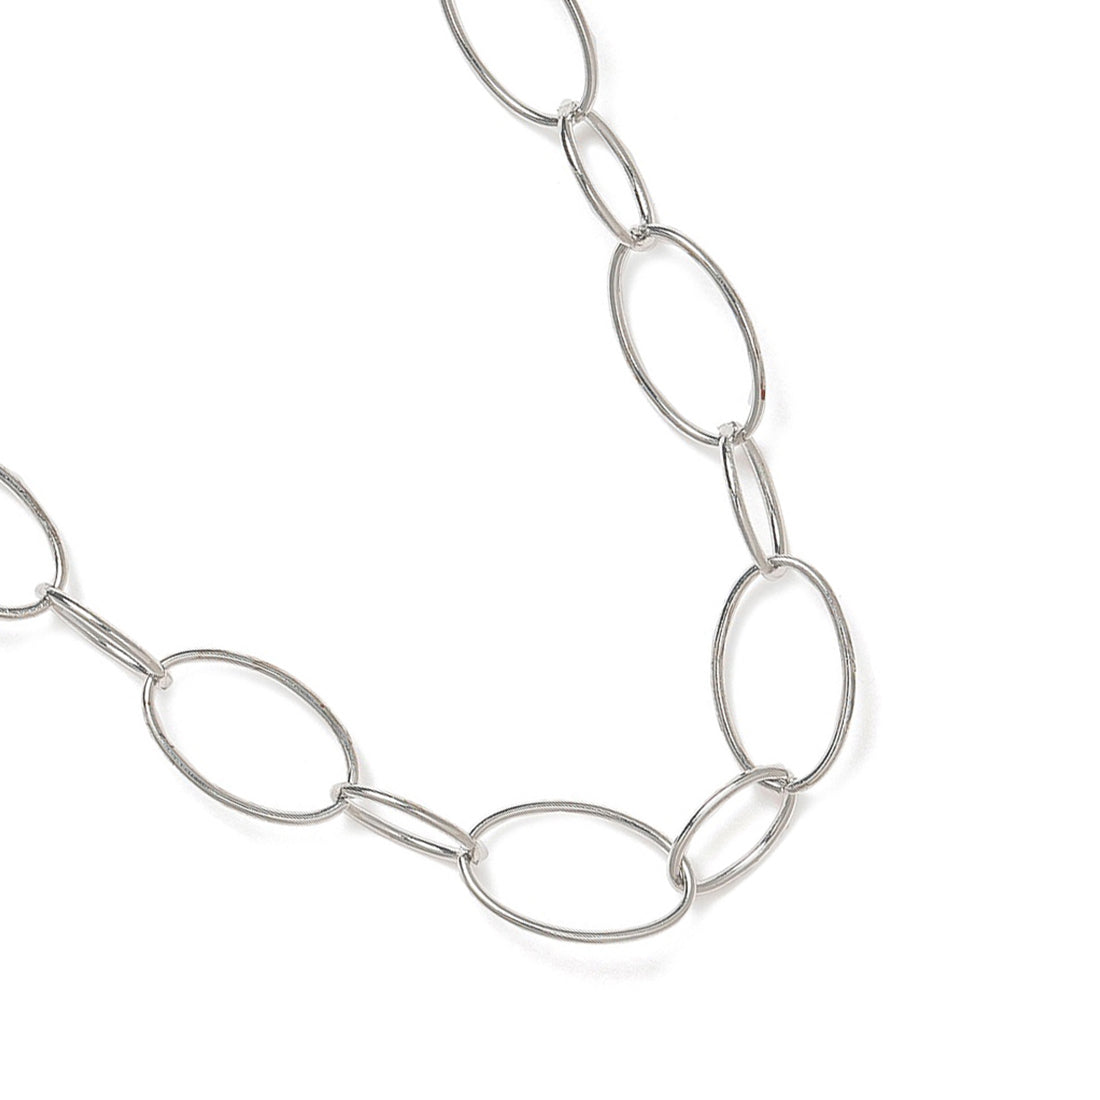 Chunky Oval Chain Link Silver-Toned Choker Necklace